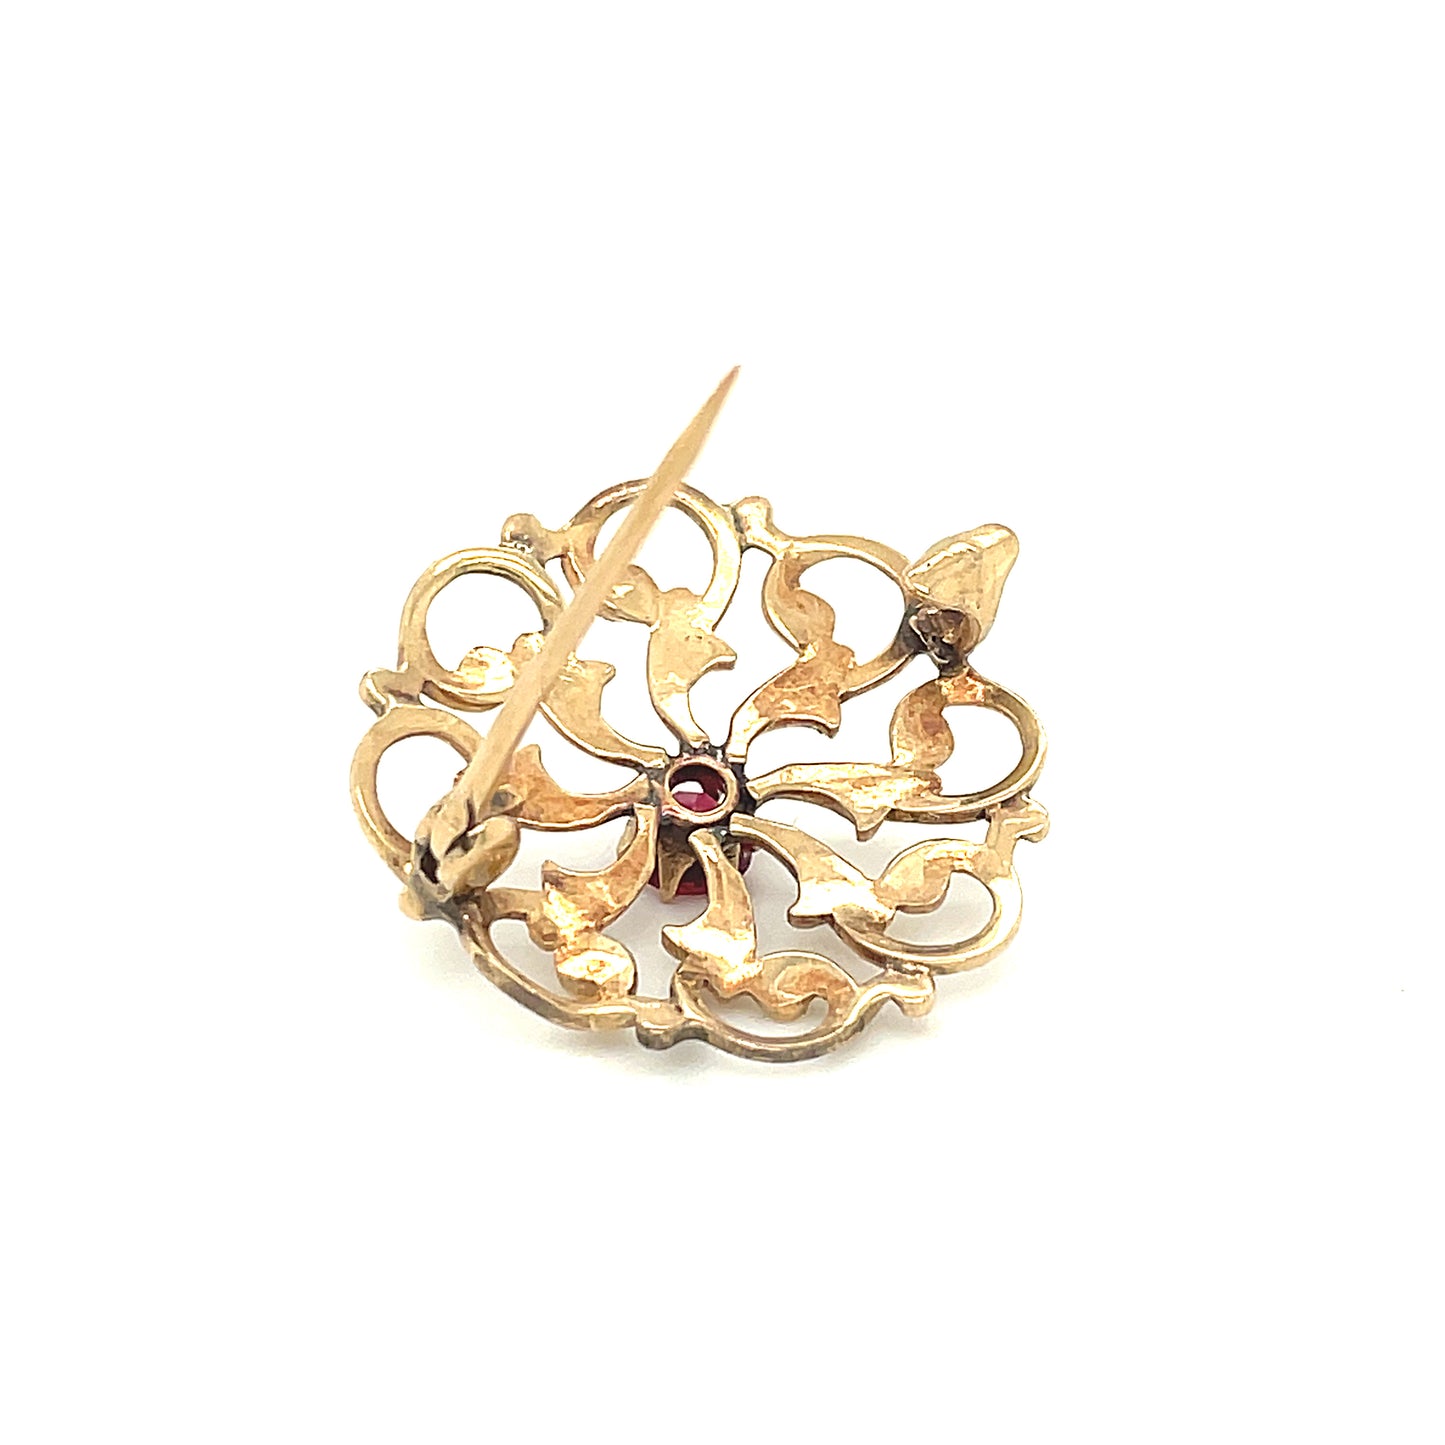 1880's Antique 10k Yellow Gold Pin Brooch With Garnet 2.7g